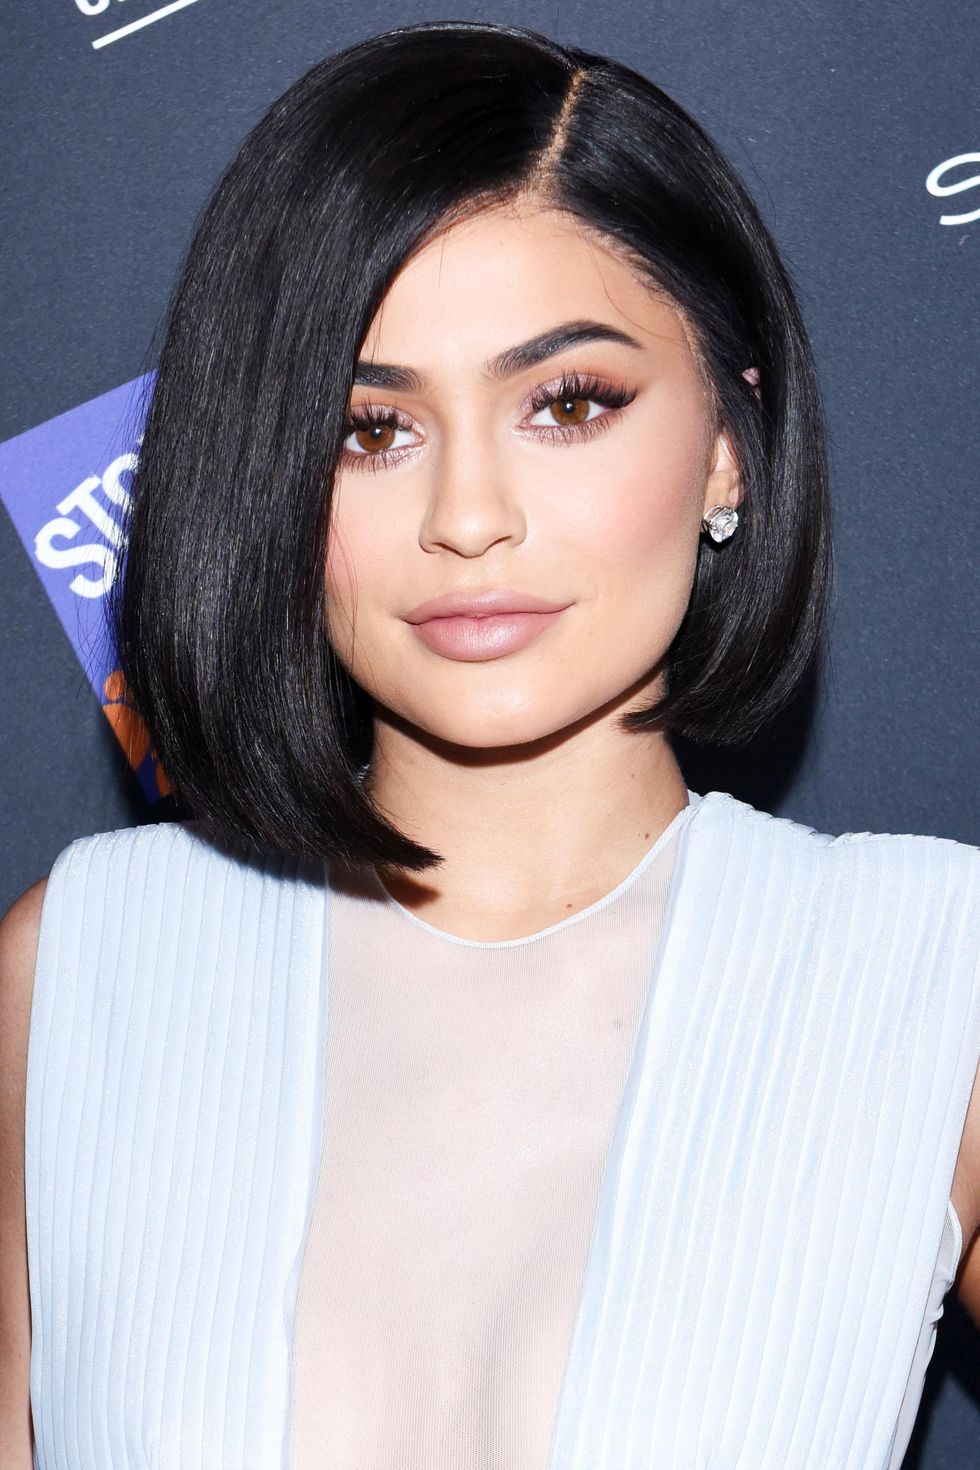 The Complete Evolution of Kylie Jenner's Hair